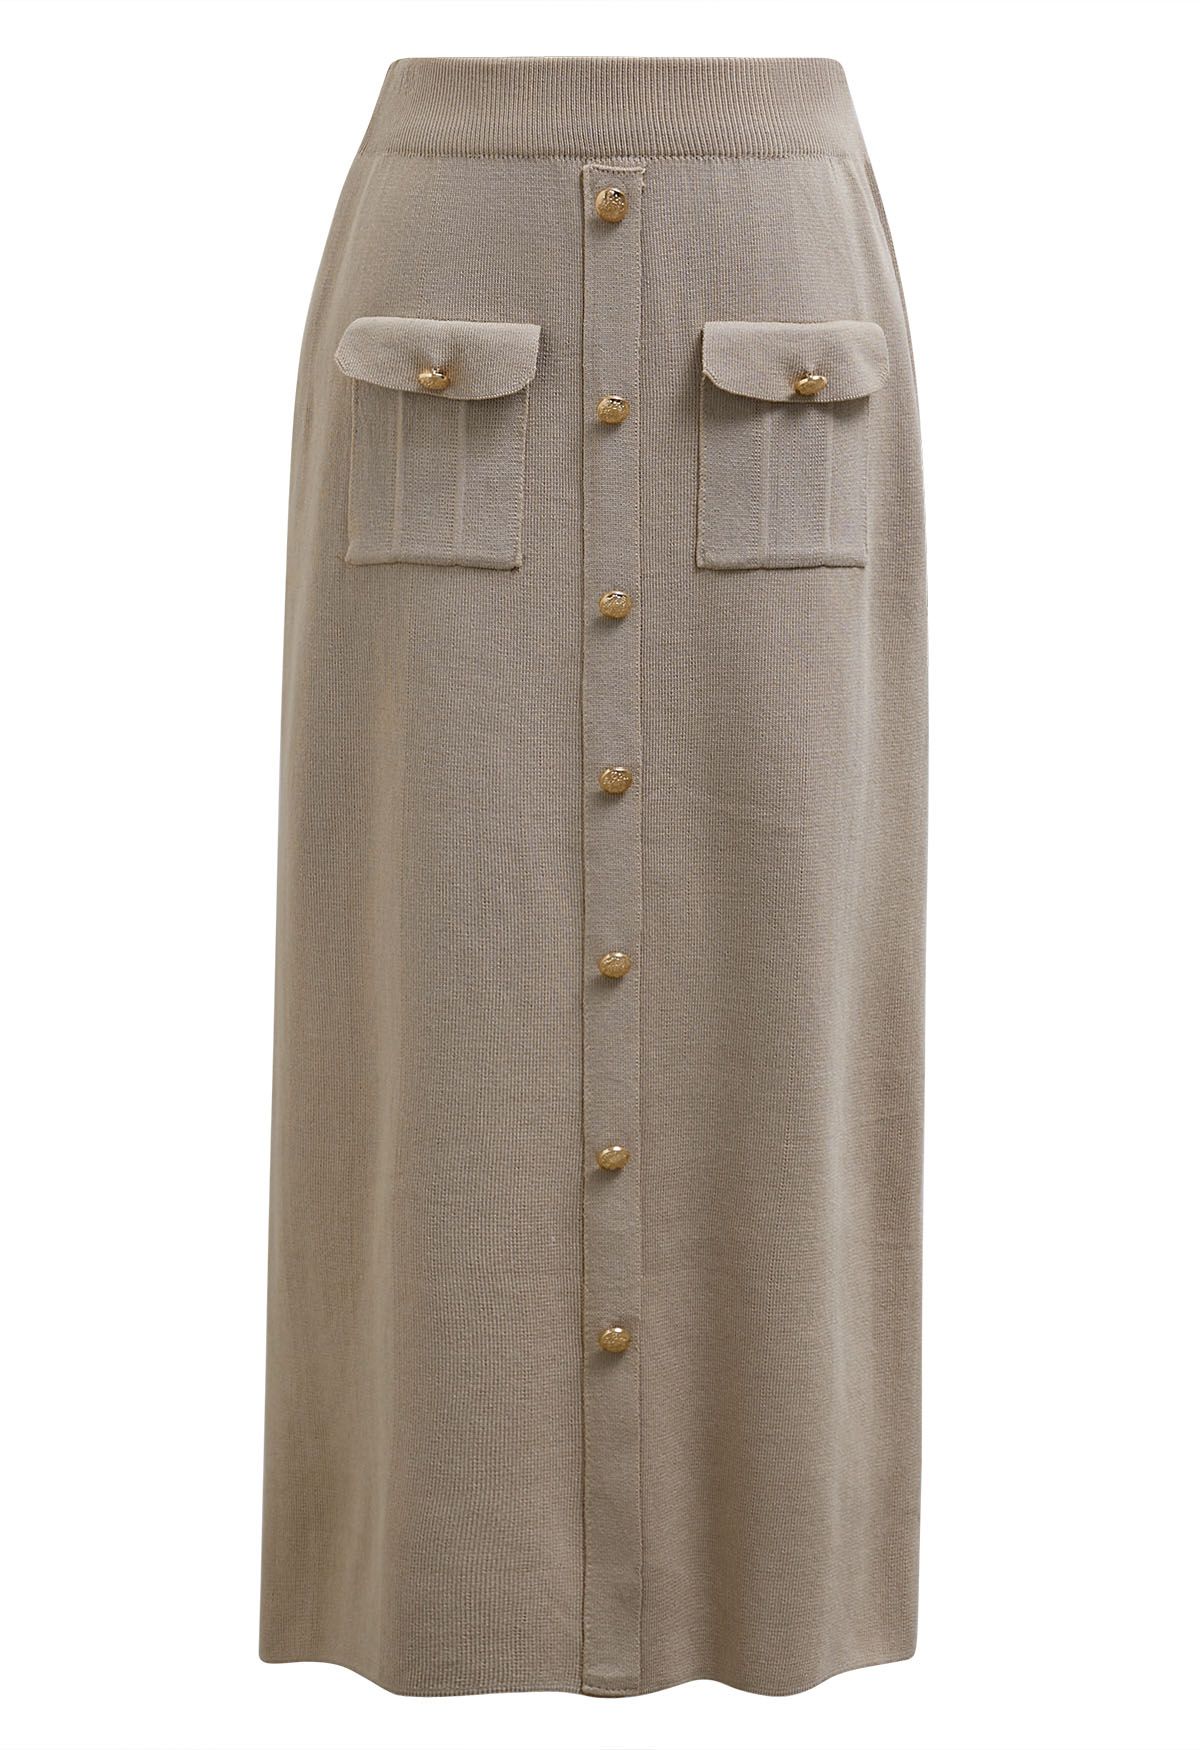 Standout Button Short-Sleeve Knit Top and Midi Skirt Set in Taupe